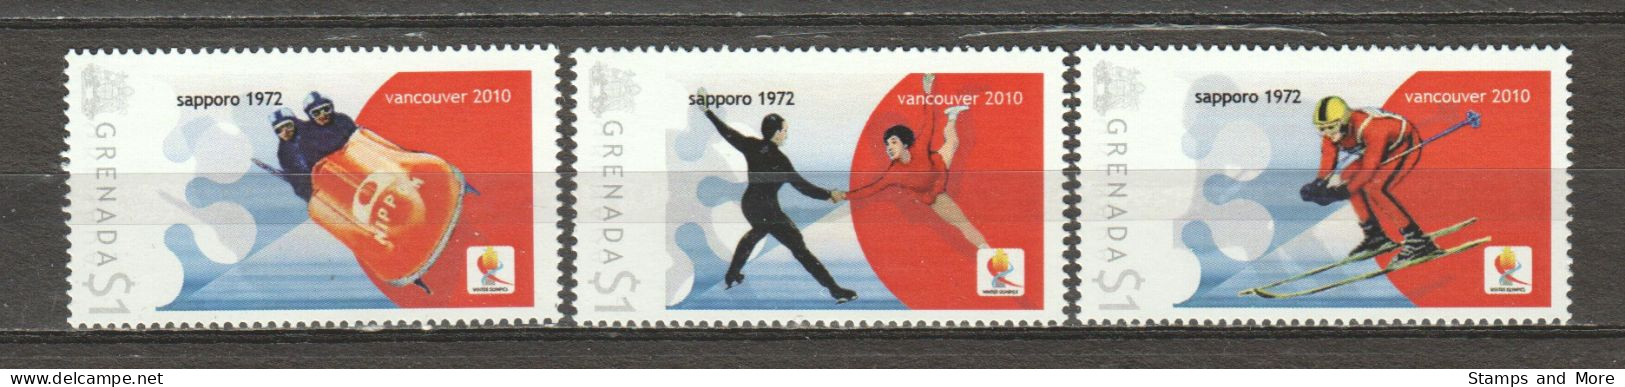 Grenada - Limited Edition Serie 11 MNH - WINTER OLYMPICS VANCOUVER 2010 - SAPPORO 1972 - Winter 2010: Vancouver